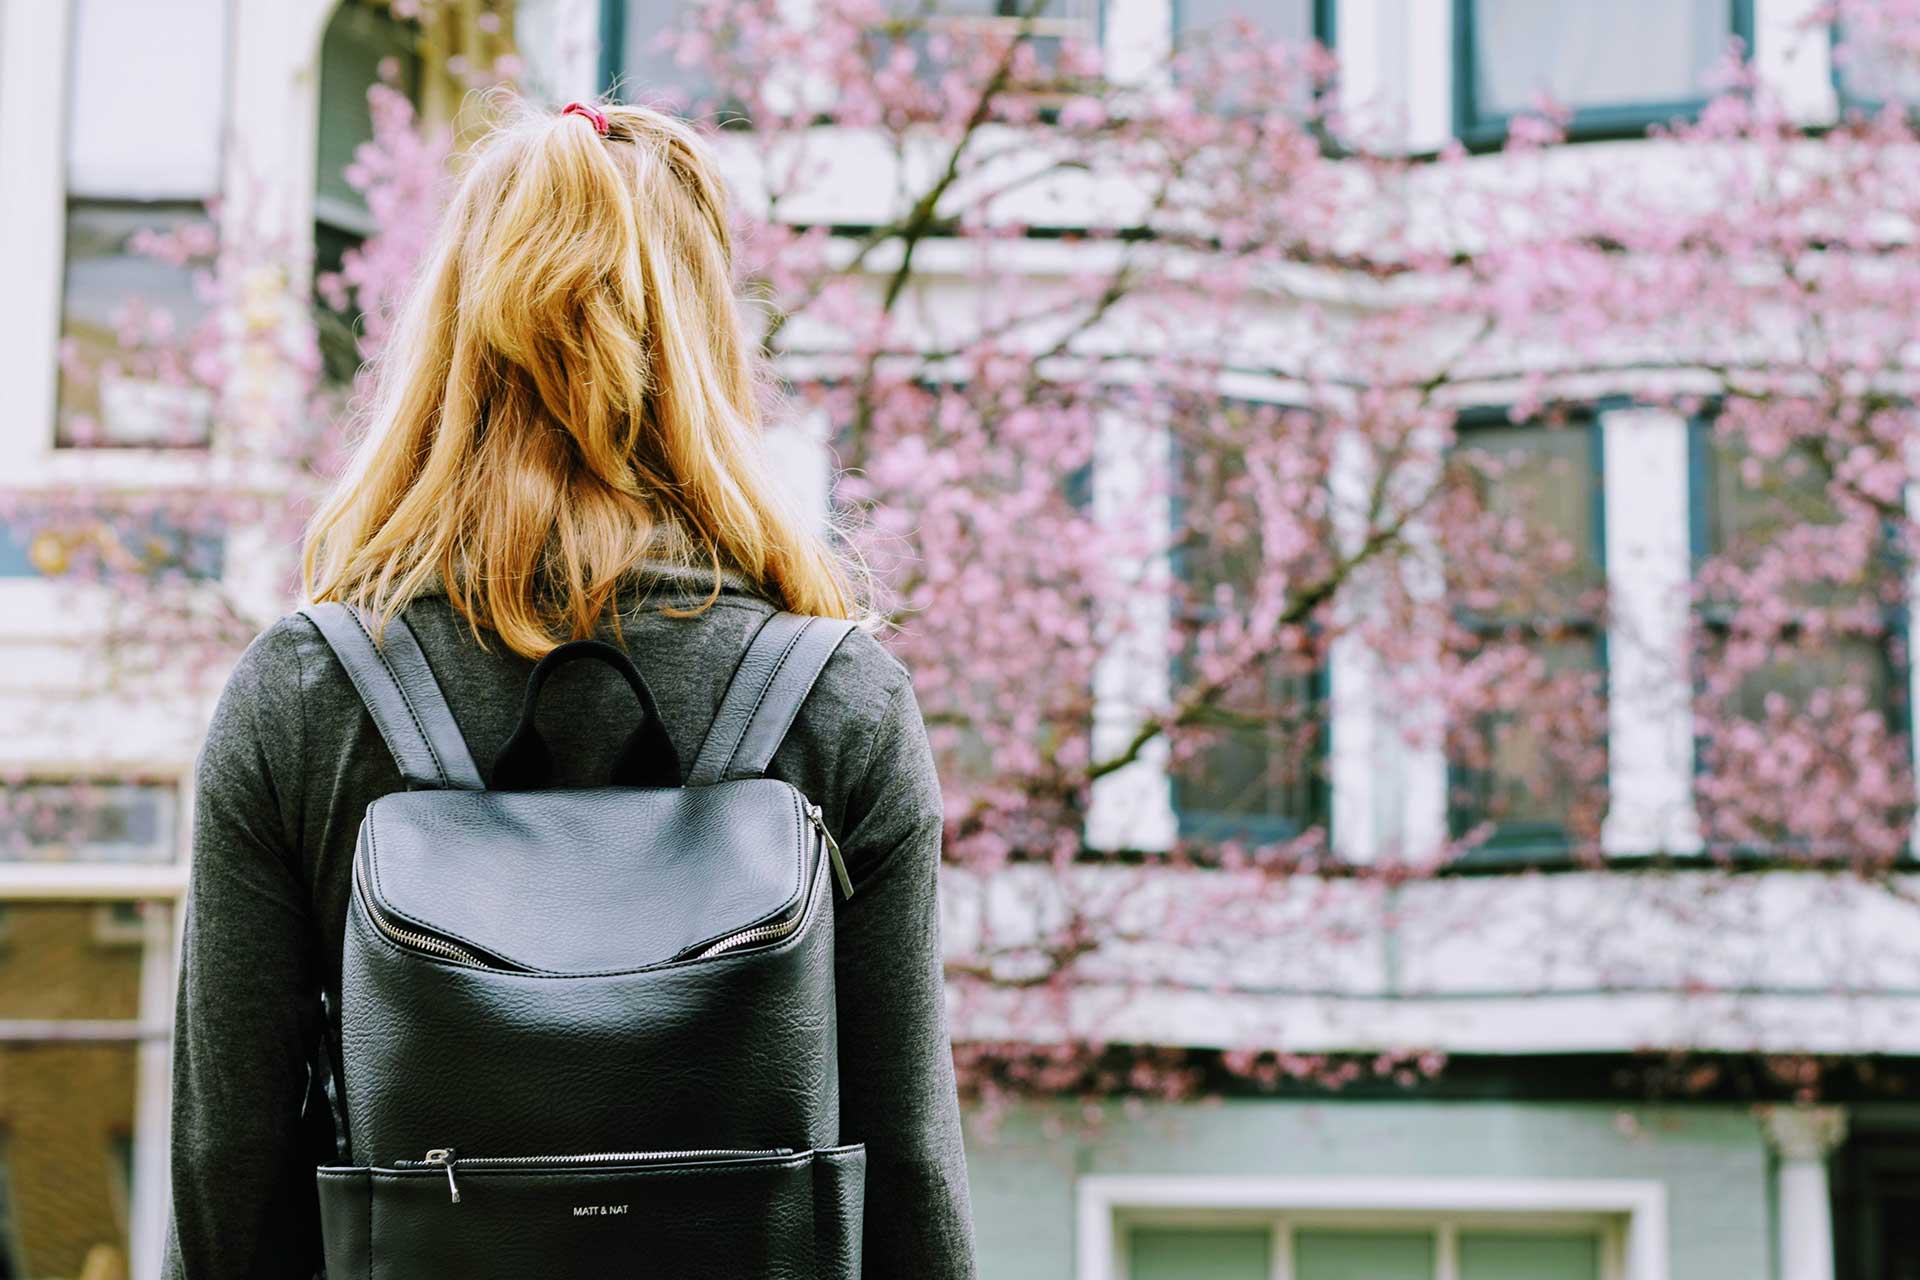 young women wearing a black backpack and facing away from camera